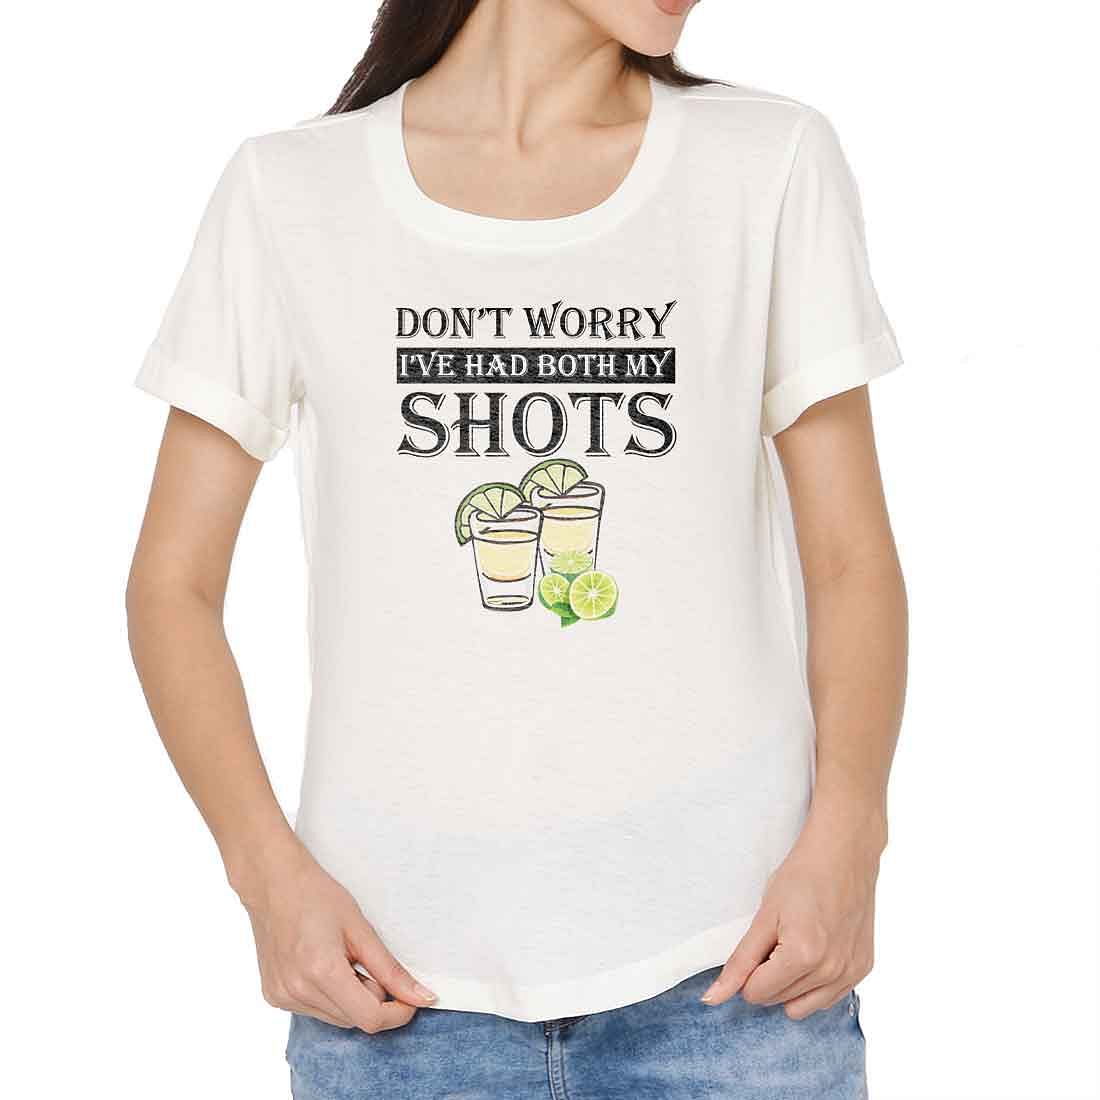 Workout Tshirt For Women - Had Both My Shots Nutcase